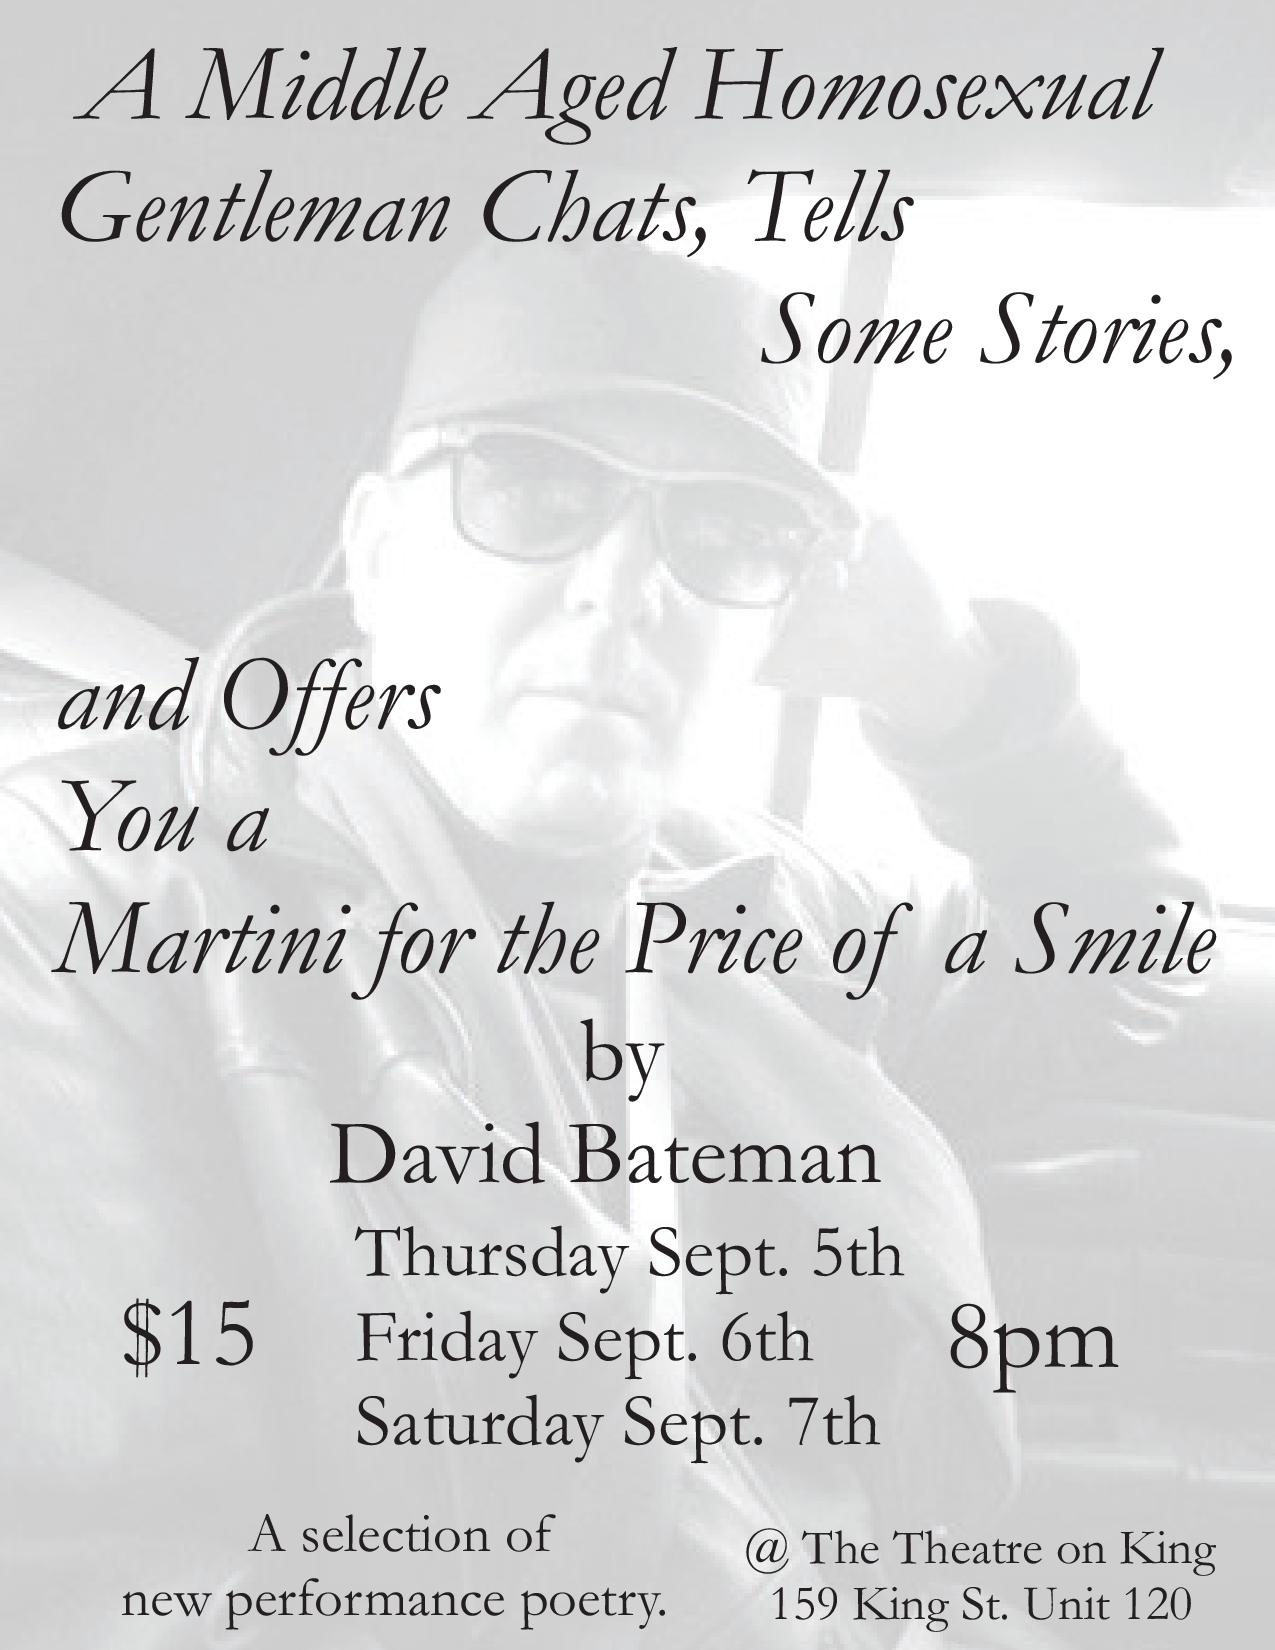 A Middle Aged Homosexual Gentleman Chats, Tells Some Stories, and Offers you a Martini for the Price of a Smile